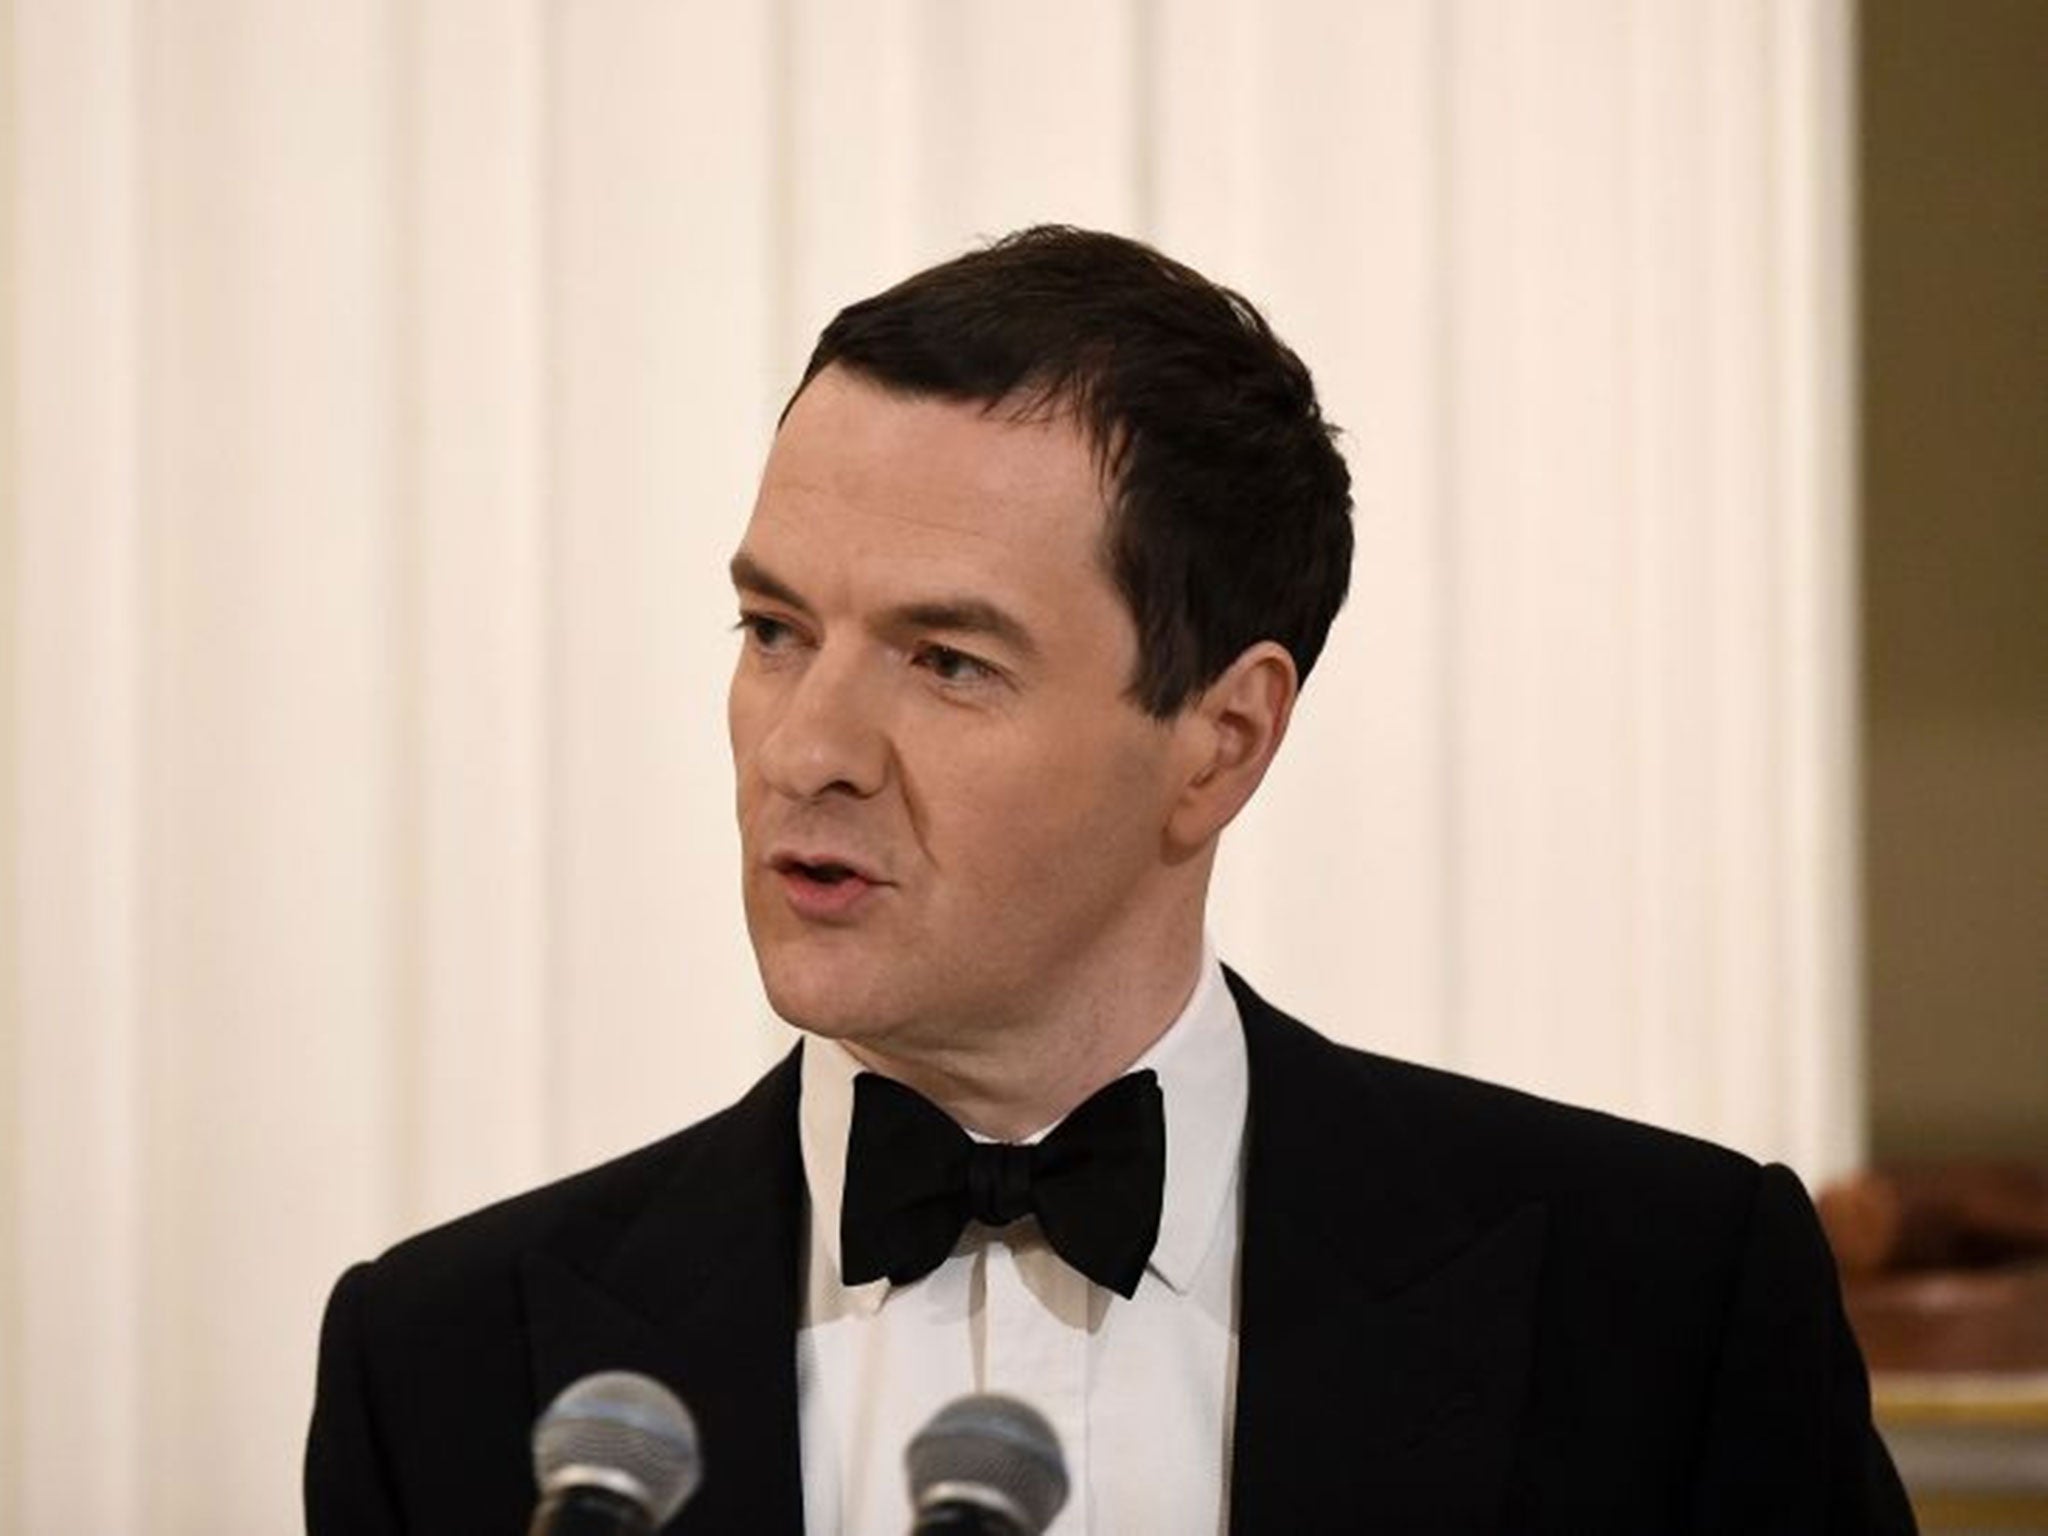 Chancellor of the Exchequer George Osborne speaks during the Lord Mayor's Dinner to the Bankers and Merchants of the City of London at The Mansion House